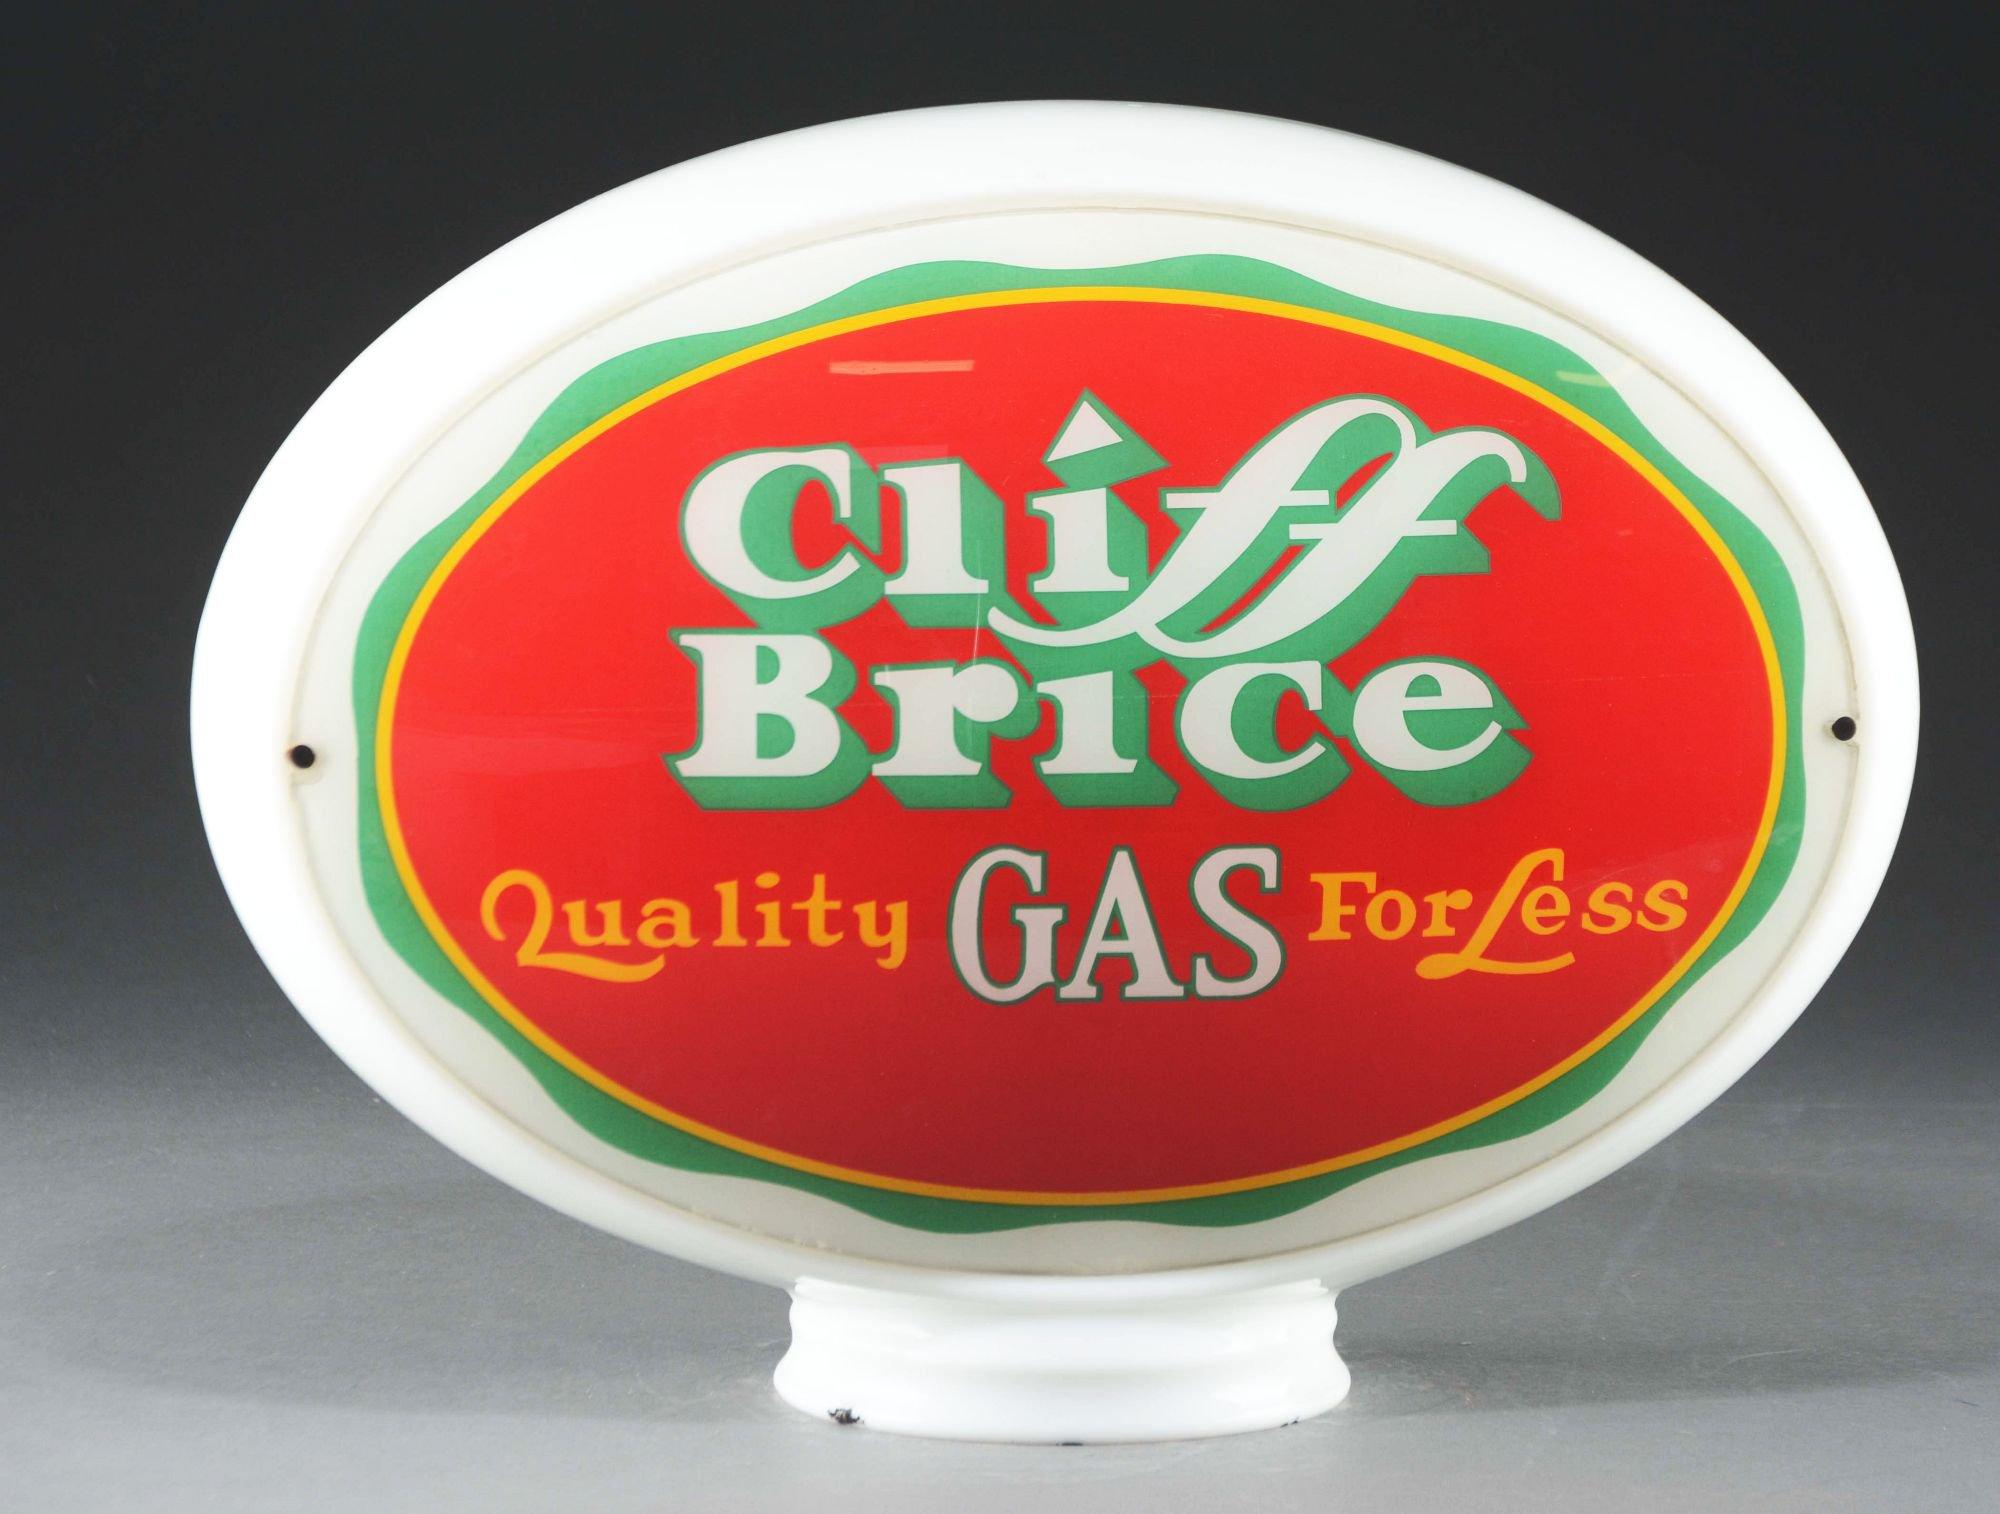 Cliff Brice Quality Gas Complete Oval Globe.